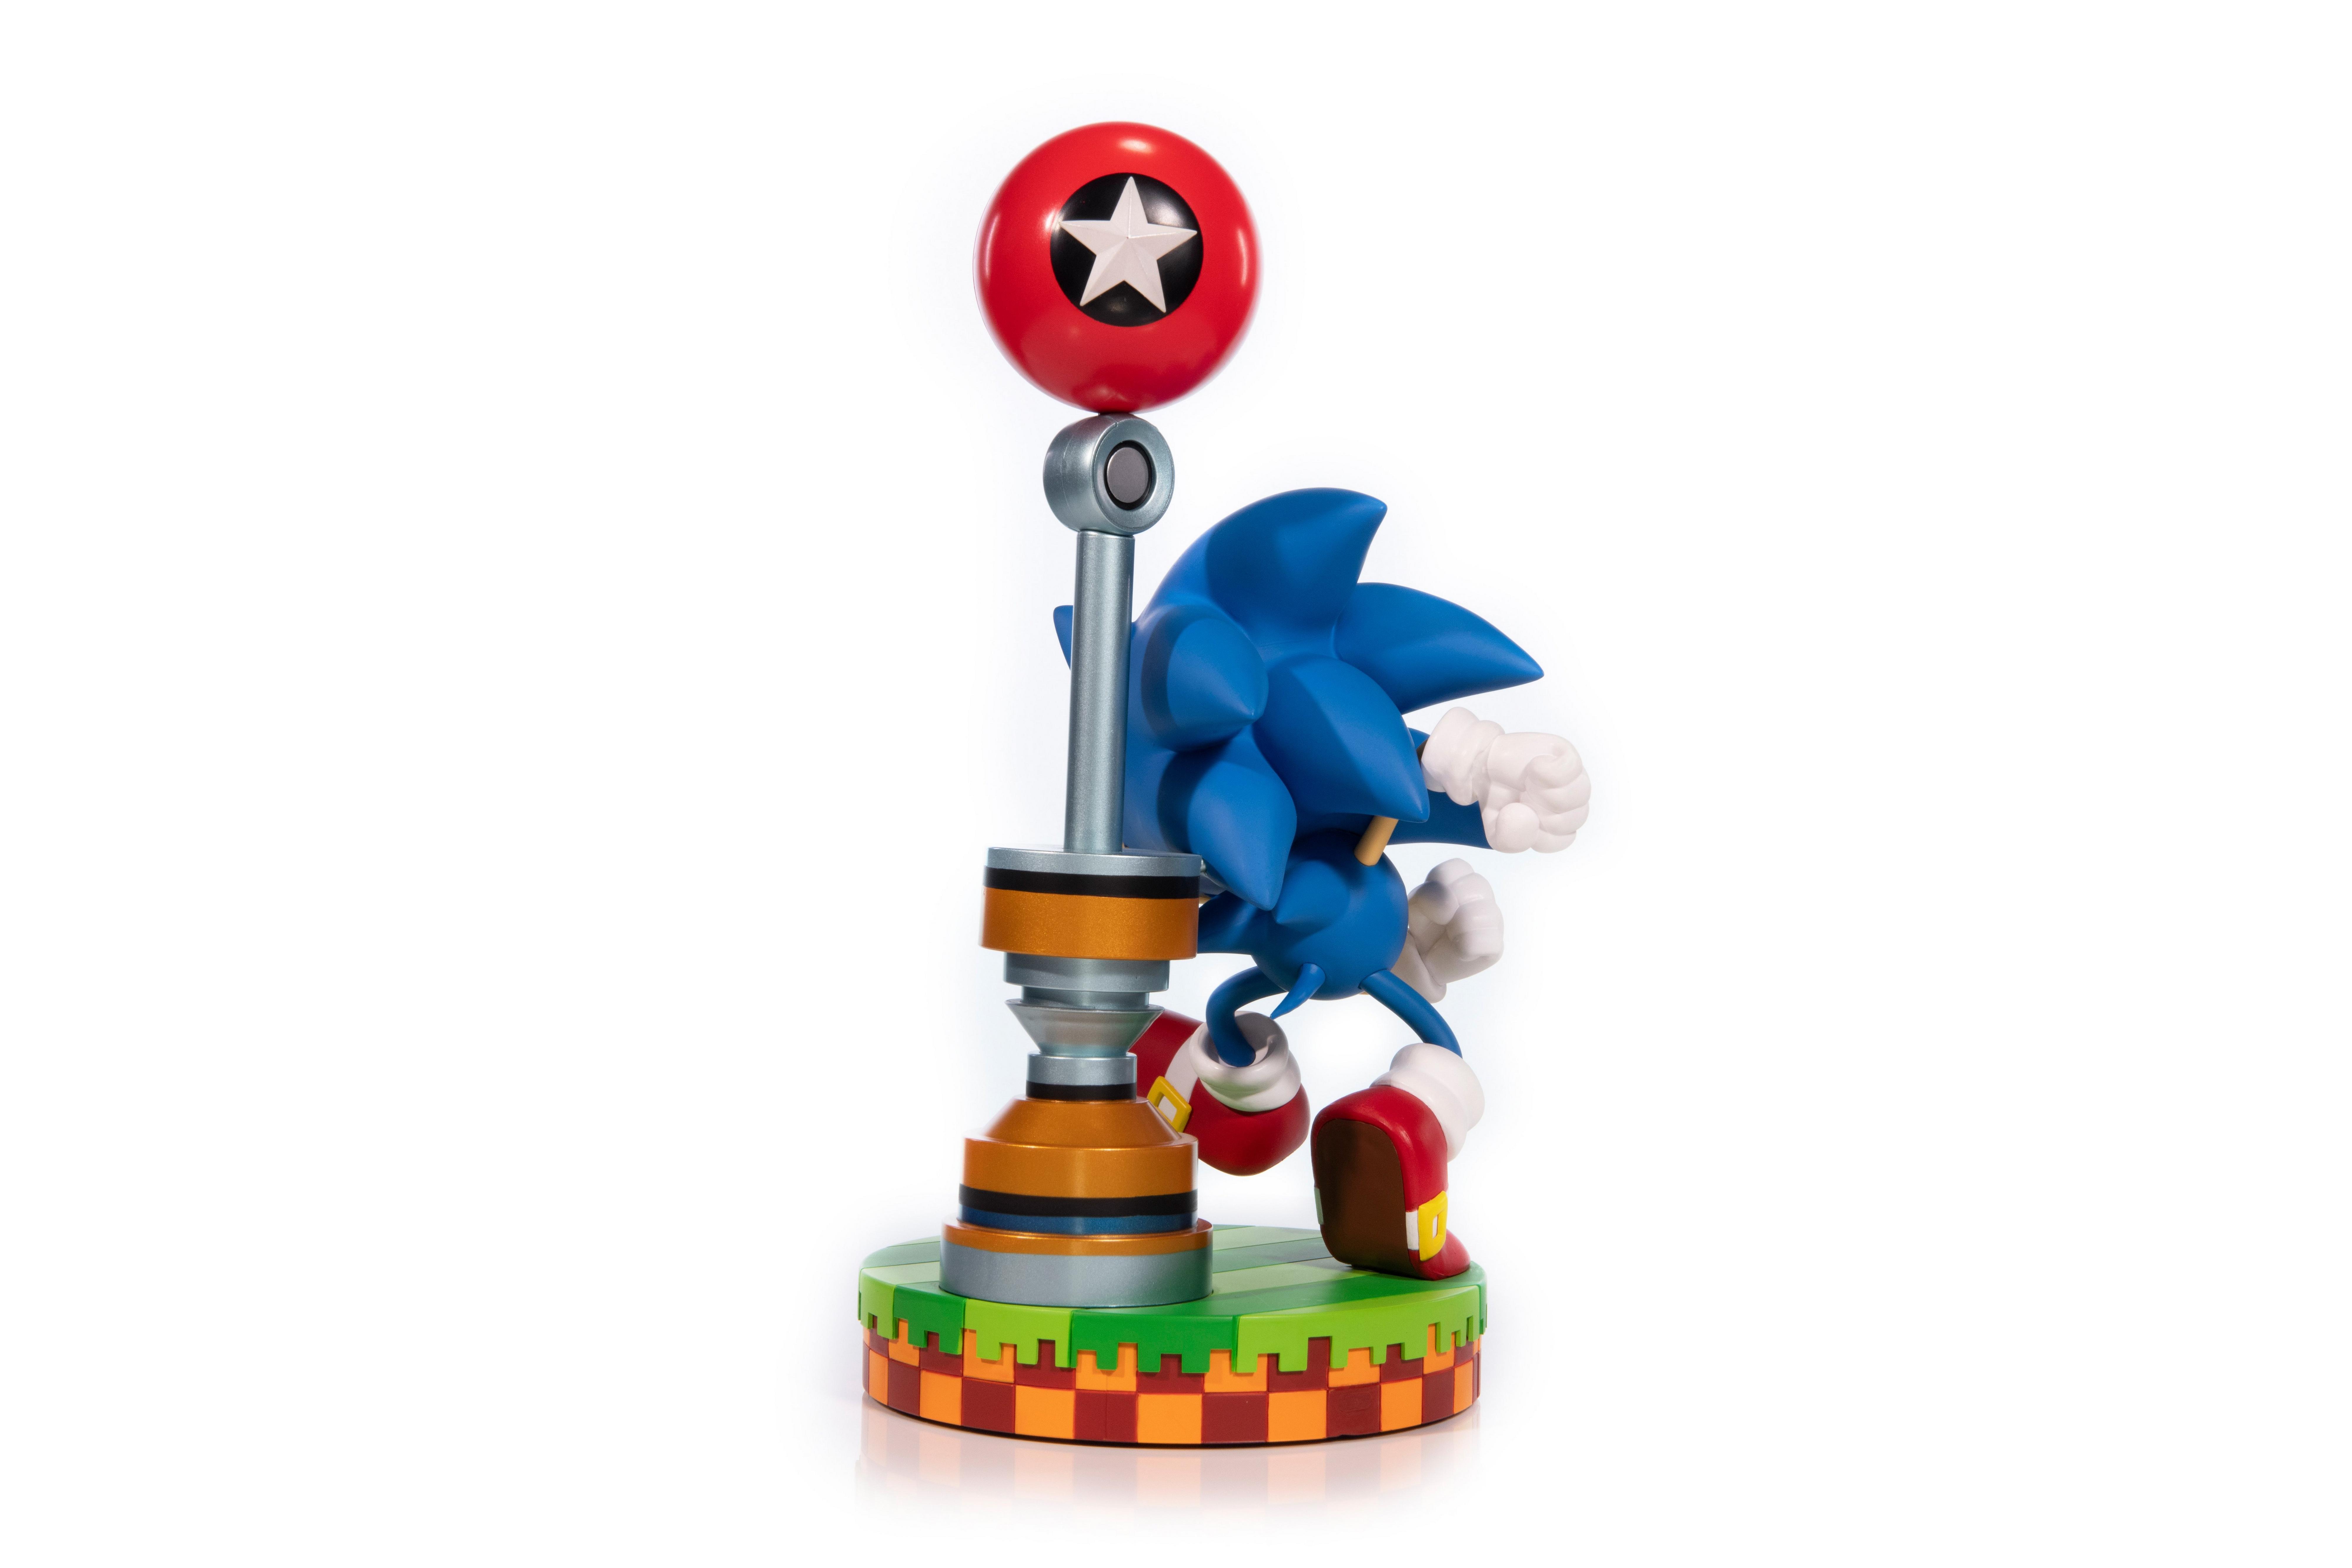 LEGO Sonic the Hedgehog statue building instruction INSTRUCTIONS